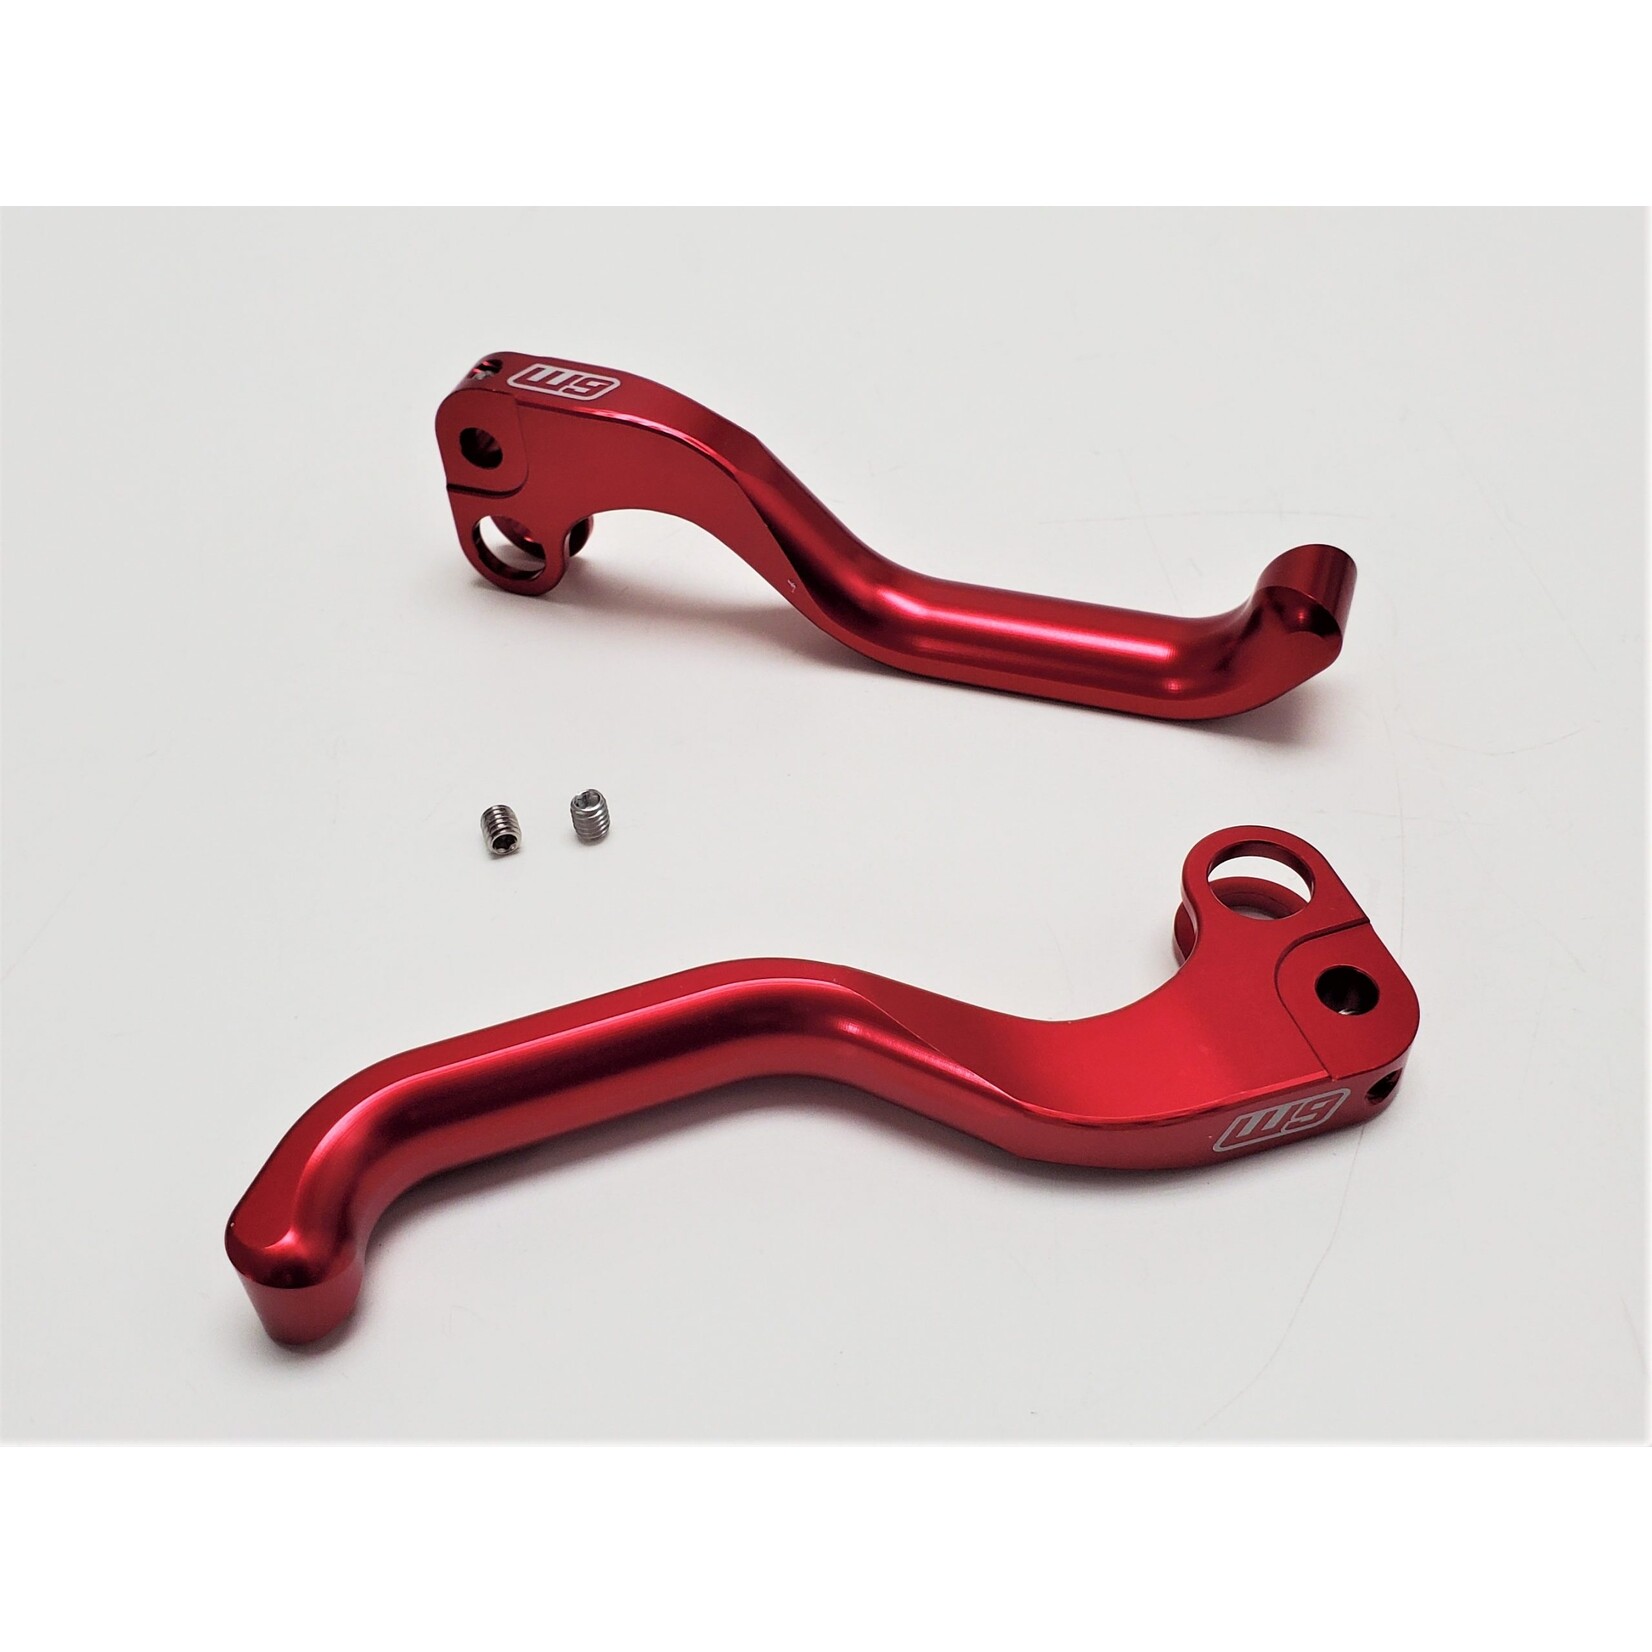 Warp9 Warp9 Red OEM Brake Lever Replacement Set Left and Right - Segway/Talaria/Sur-Ron